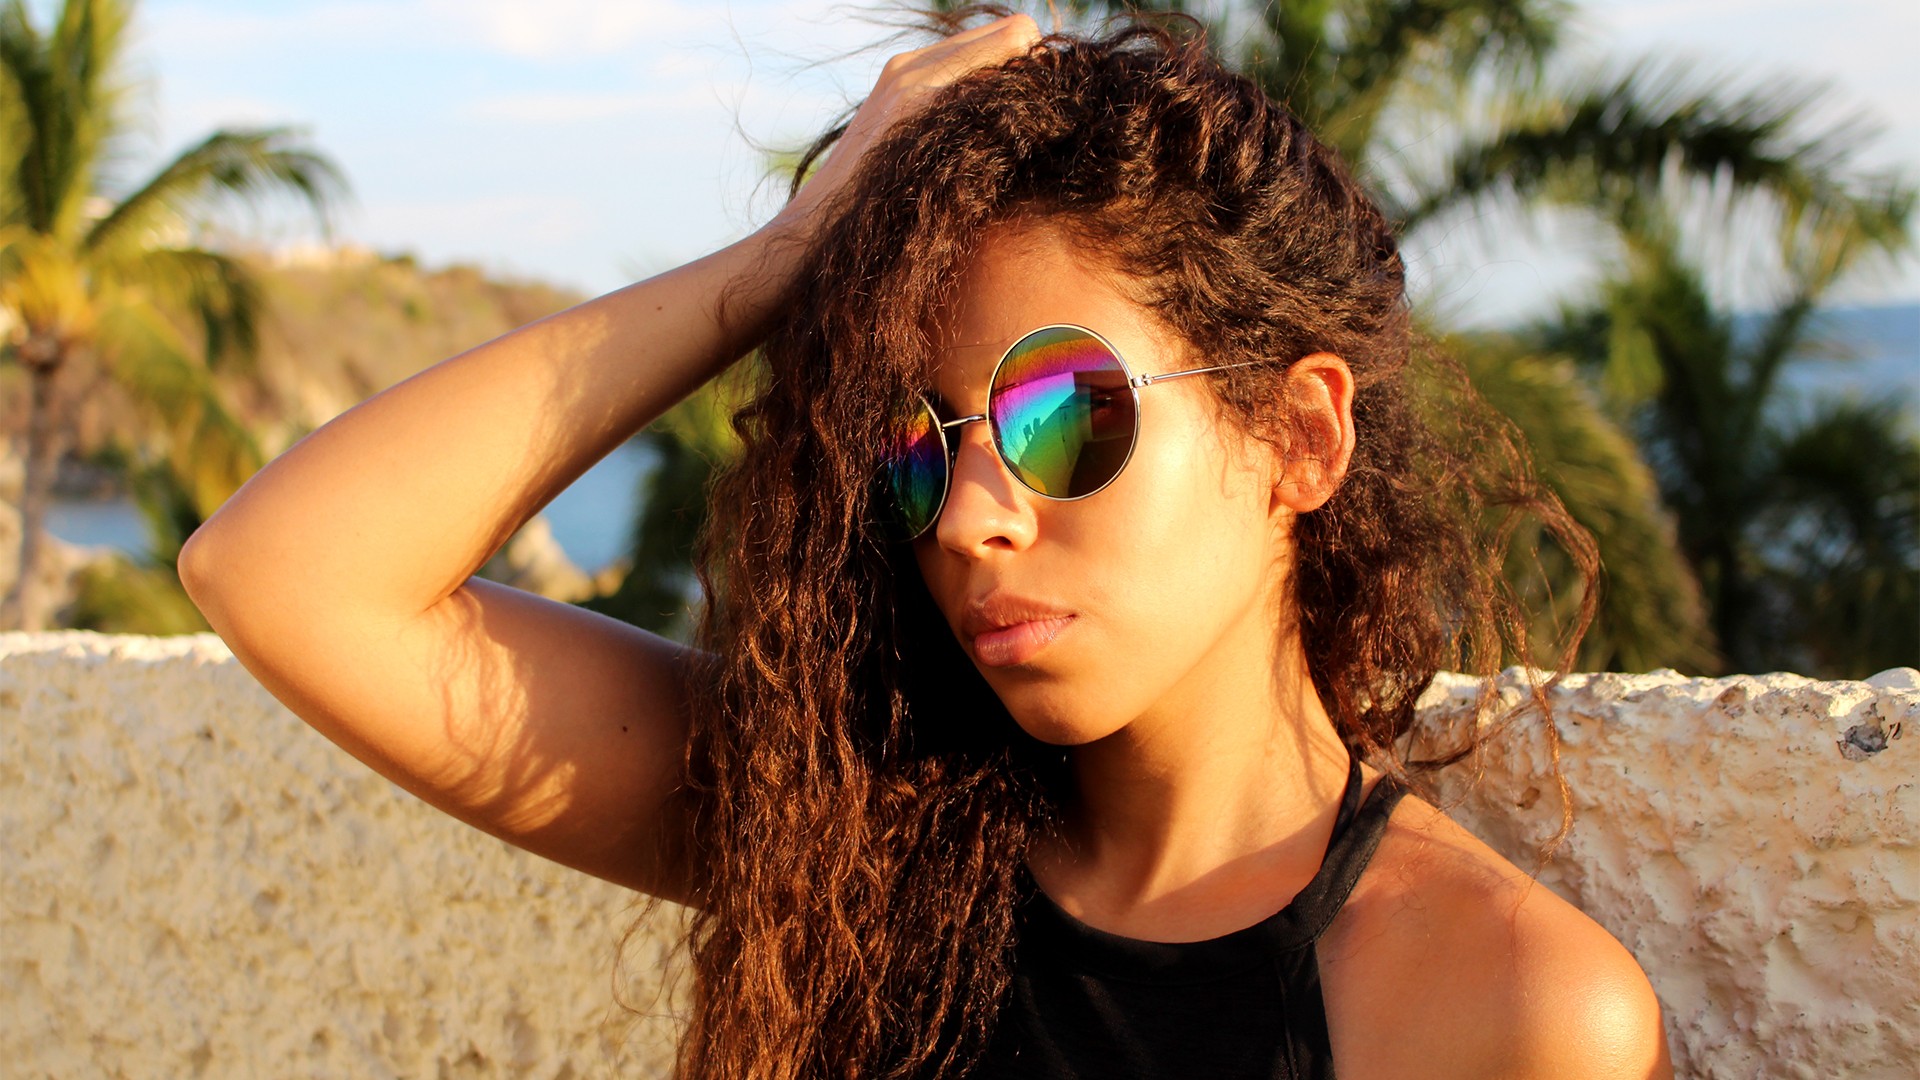 Chia Habte African Women Curly Hair Brunette Looking Away Women With Glasses Long Hair Outdoors 1920x1080